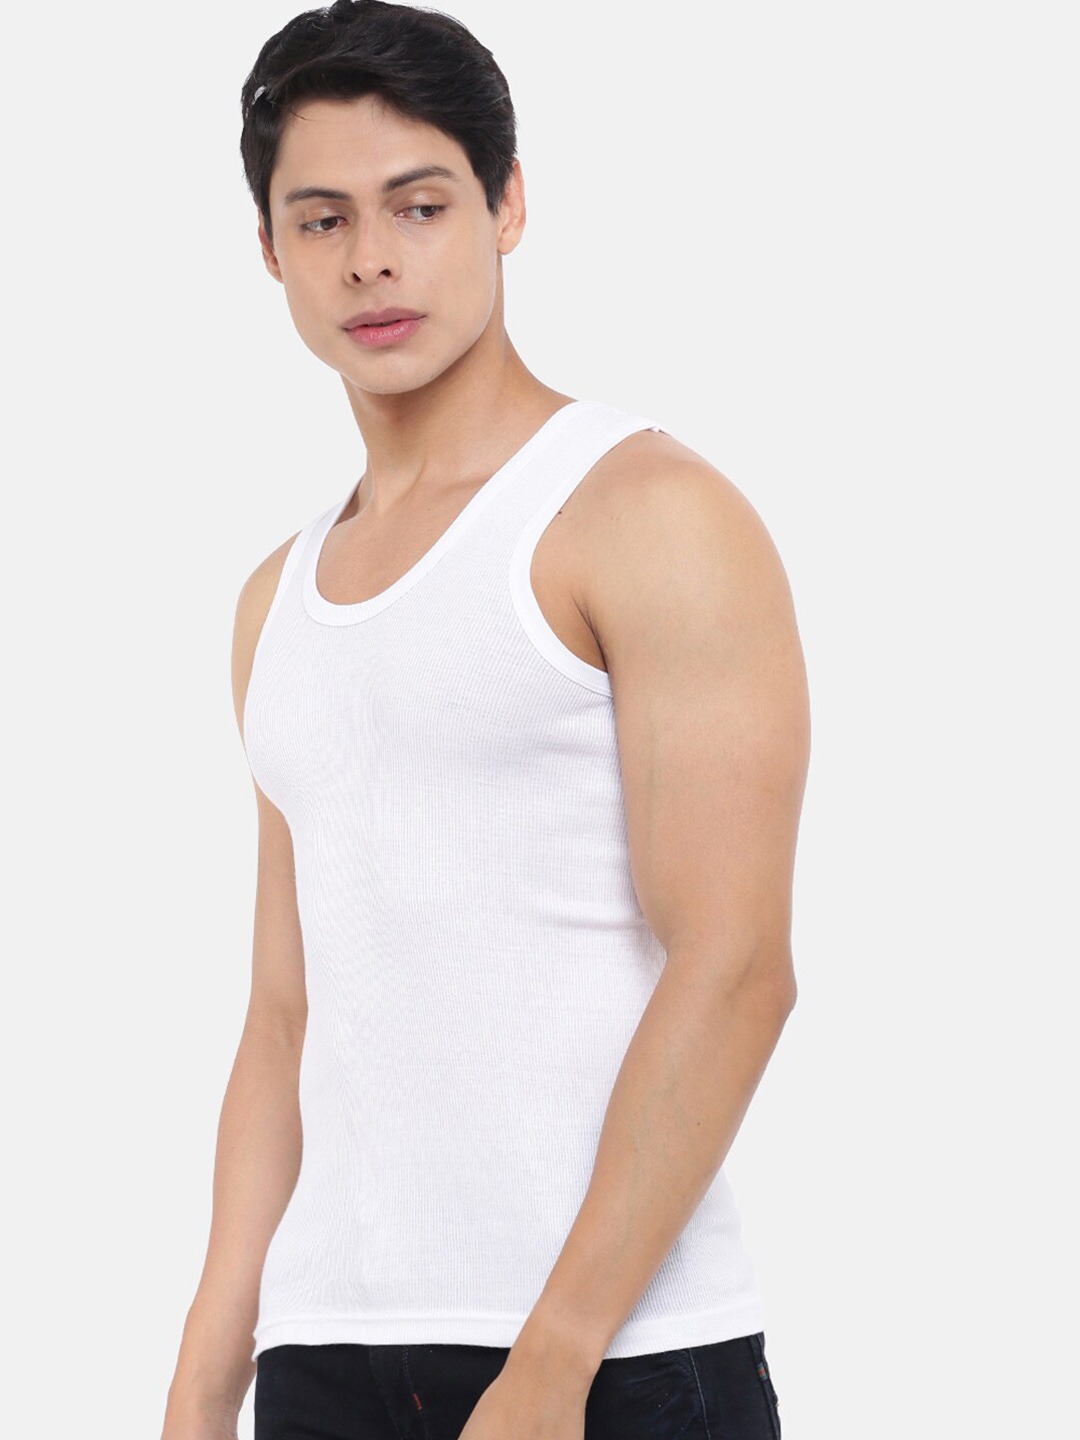 Clothing Innerwear Vests | Dollar Bigboss Men Pack Of 5 White Solid Pure Combed Cotton Basic Vests - PX70007